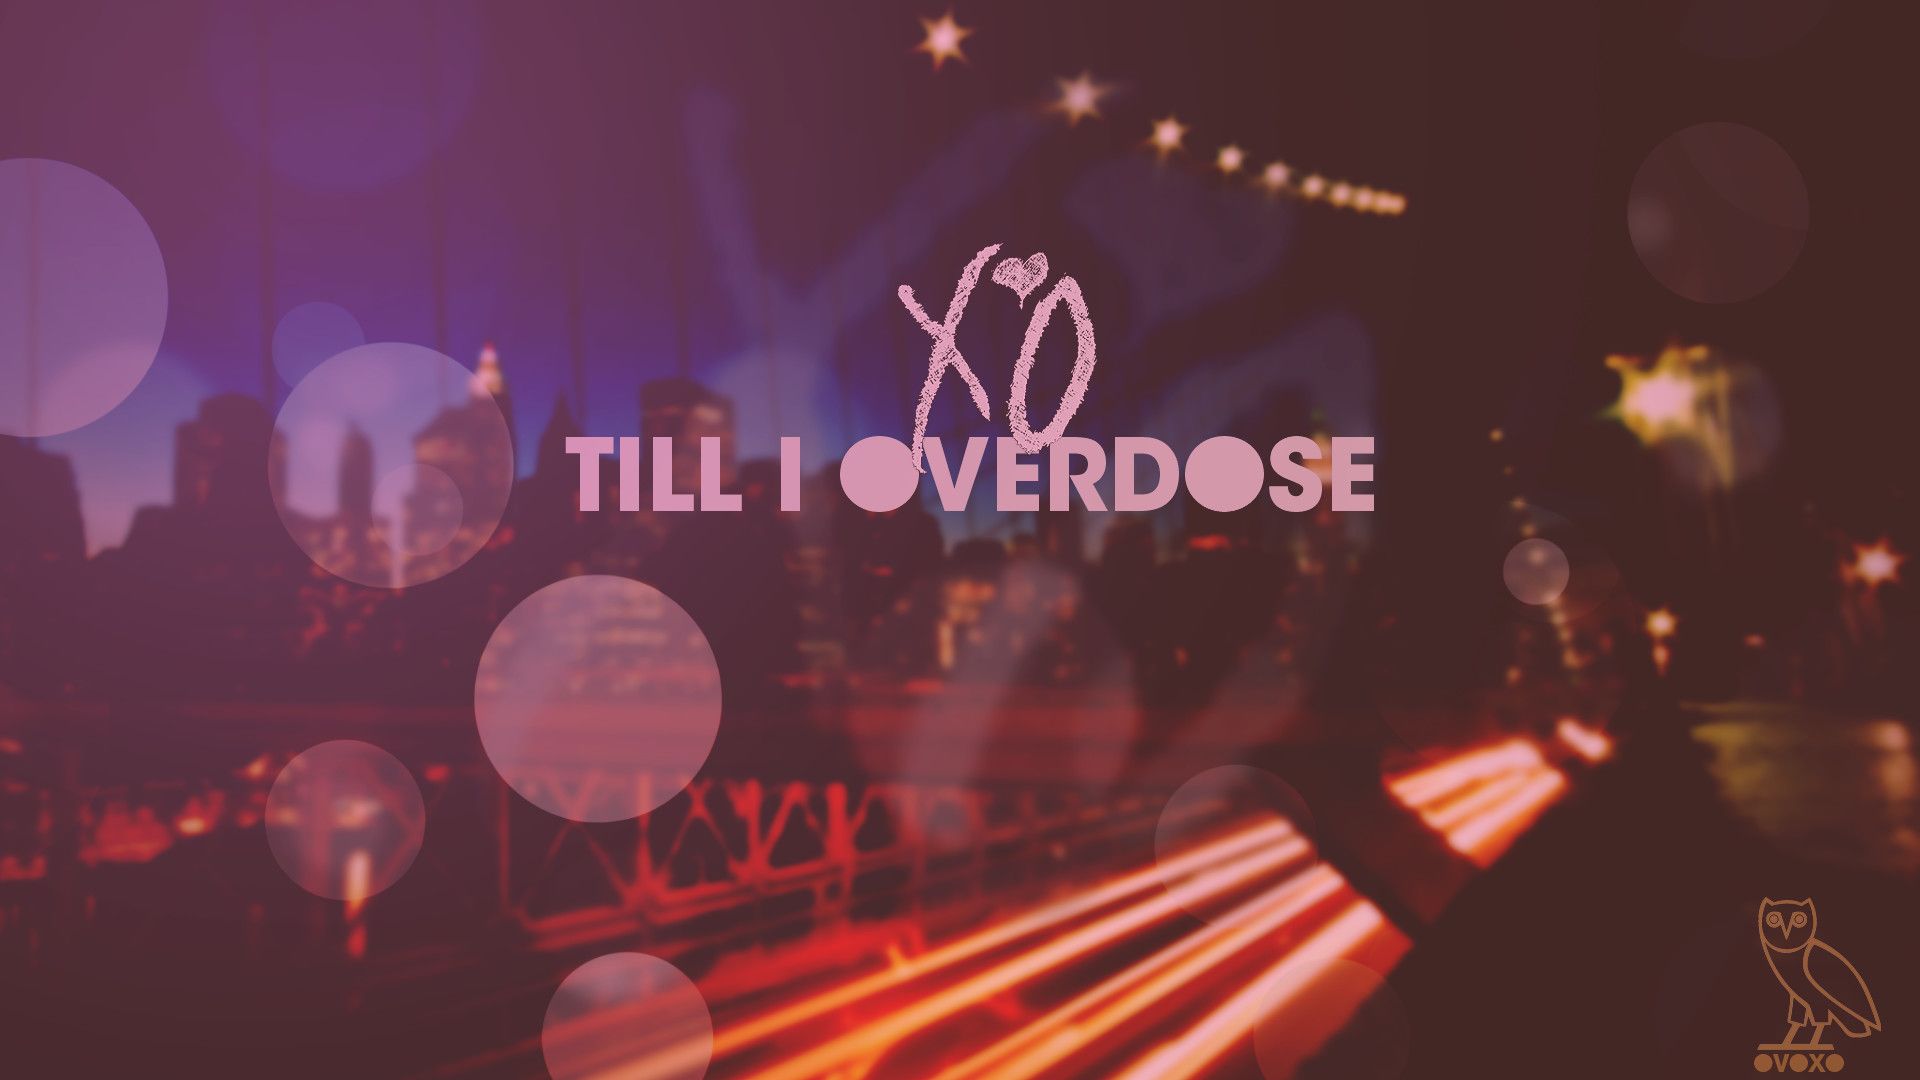 The weeknd wallpaper, the weeknd, overexposed, till i overdose, the weeknd quotes, the weeknd lyrics, the weeknd wallpaper, the weeknd backgrounds, the weeknd images, the weeknd pictures, the weeknd photos, the weeknd pic, the weeknd pic - The Weeknd